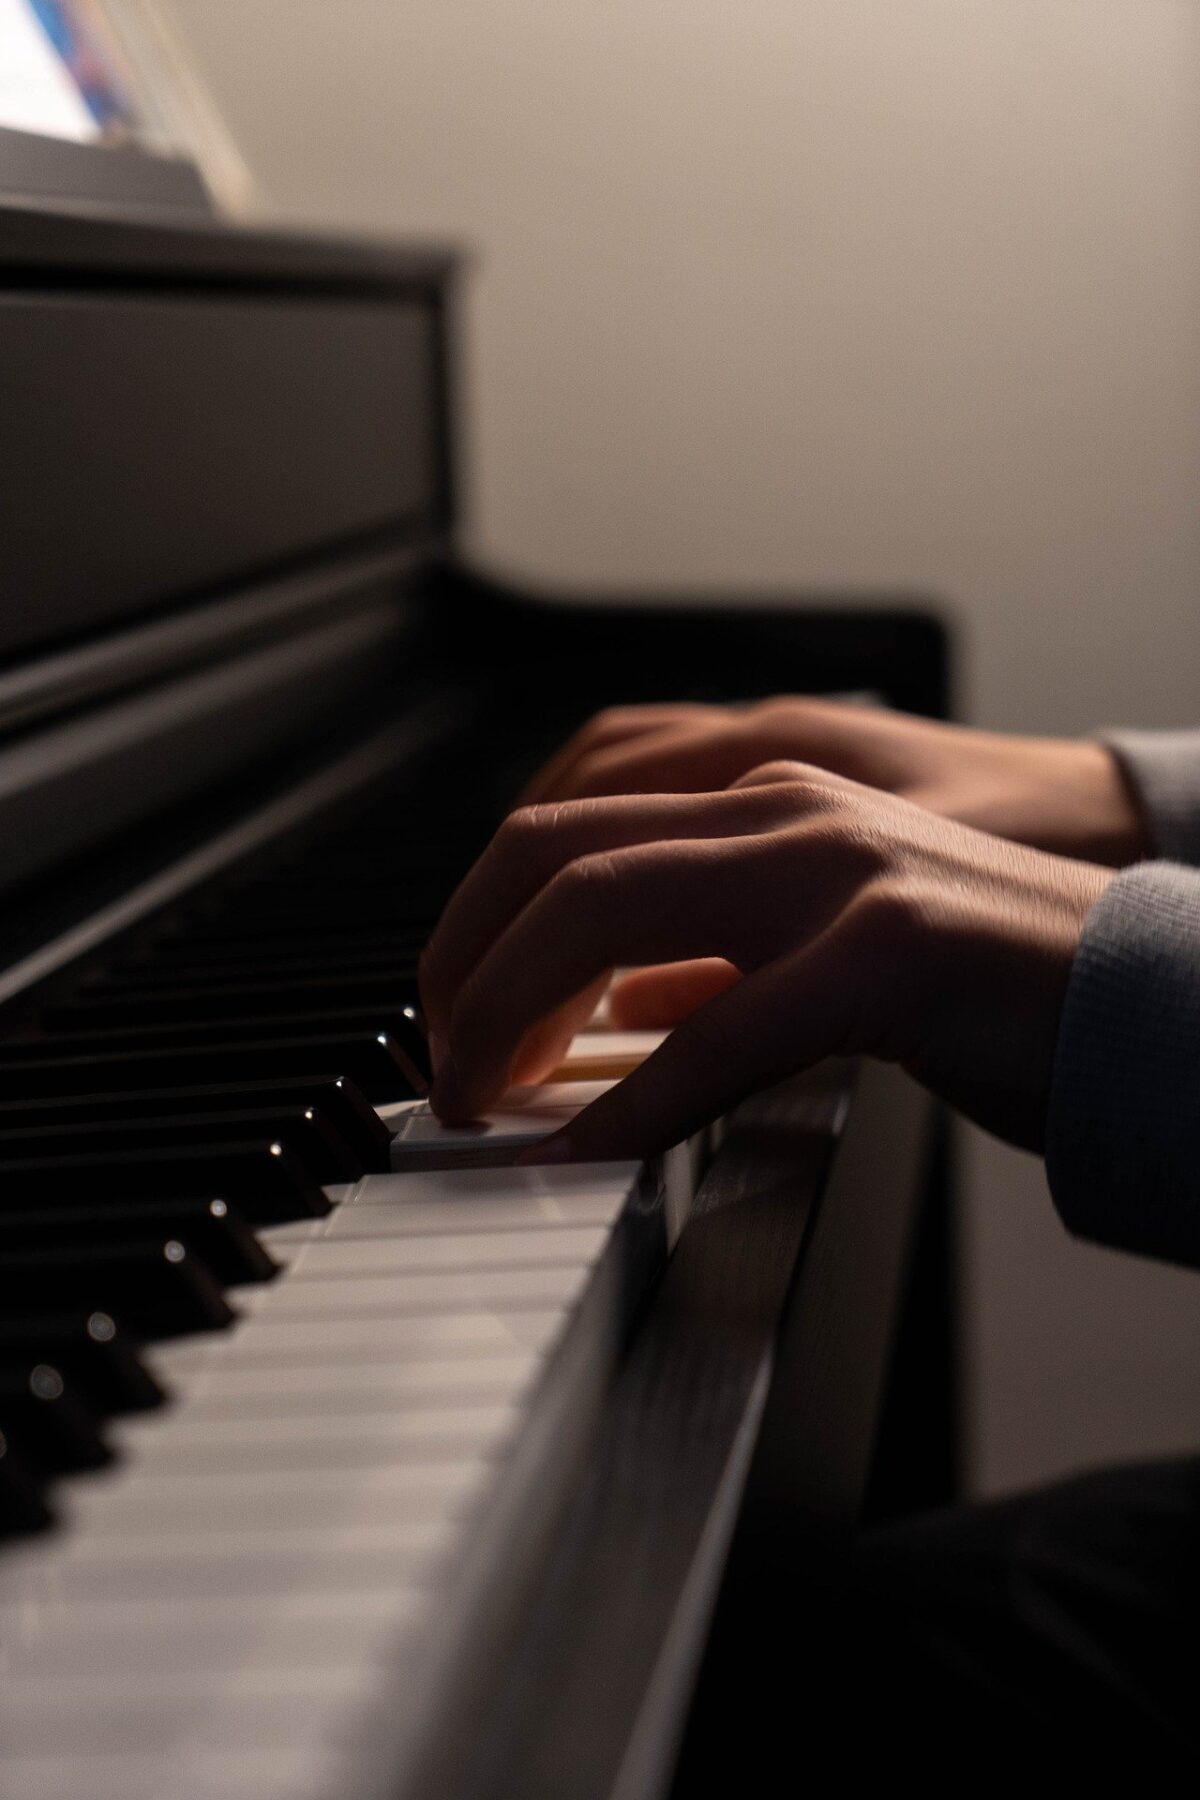 Piano Rental Service in Pasadena | Find the Best Piano Rental Services